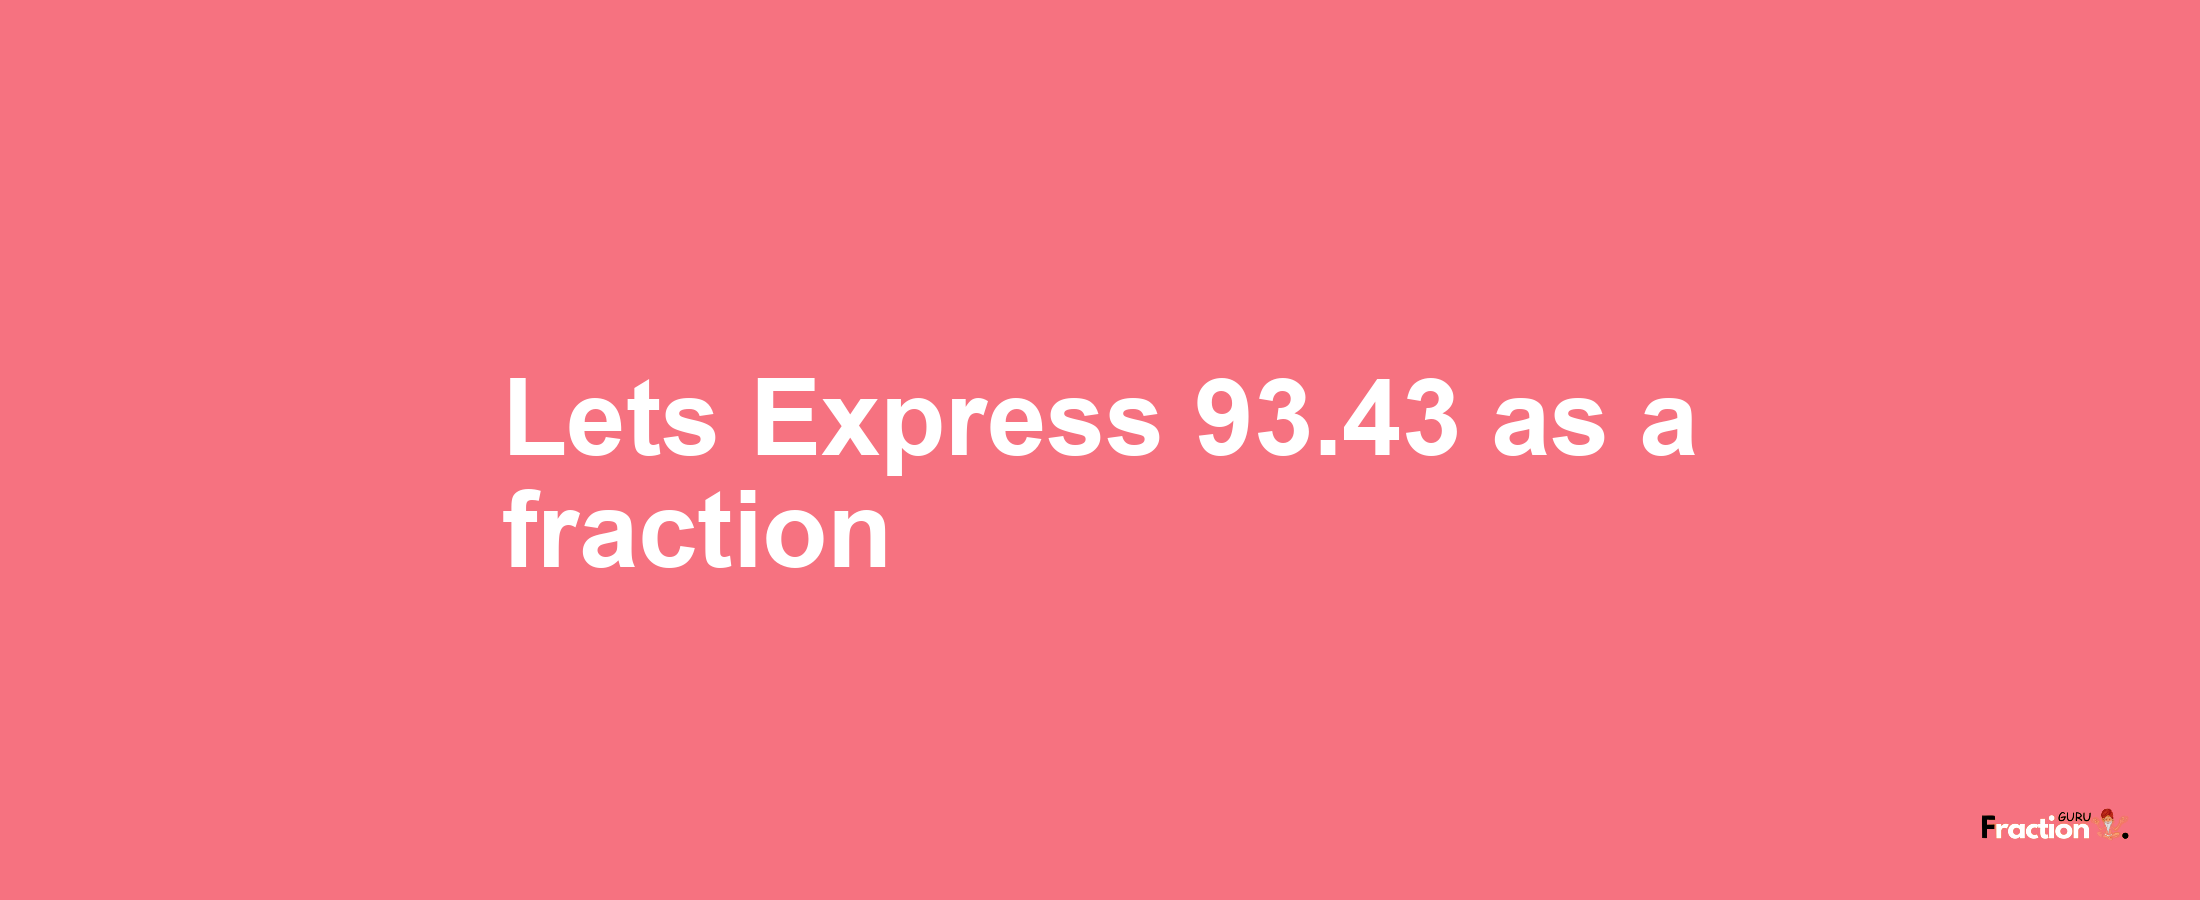 Lets Express 93.43 as afraction